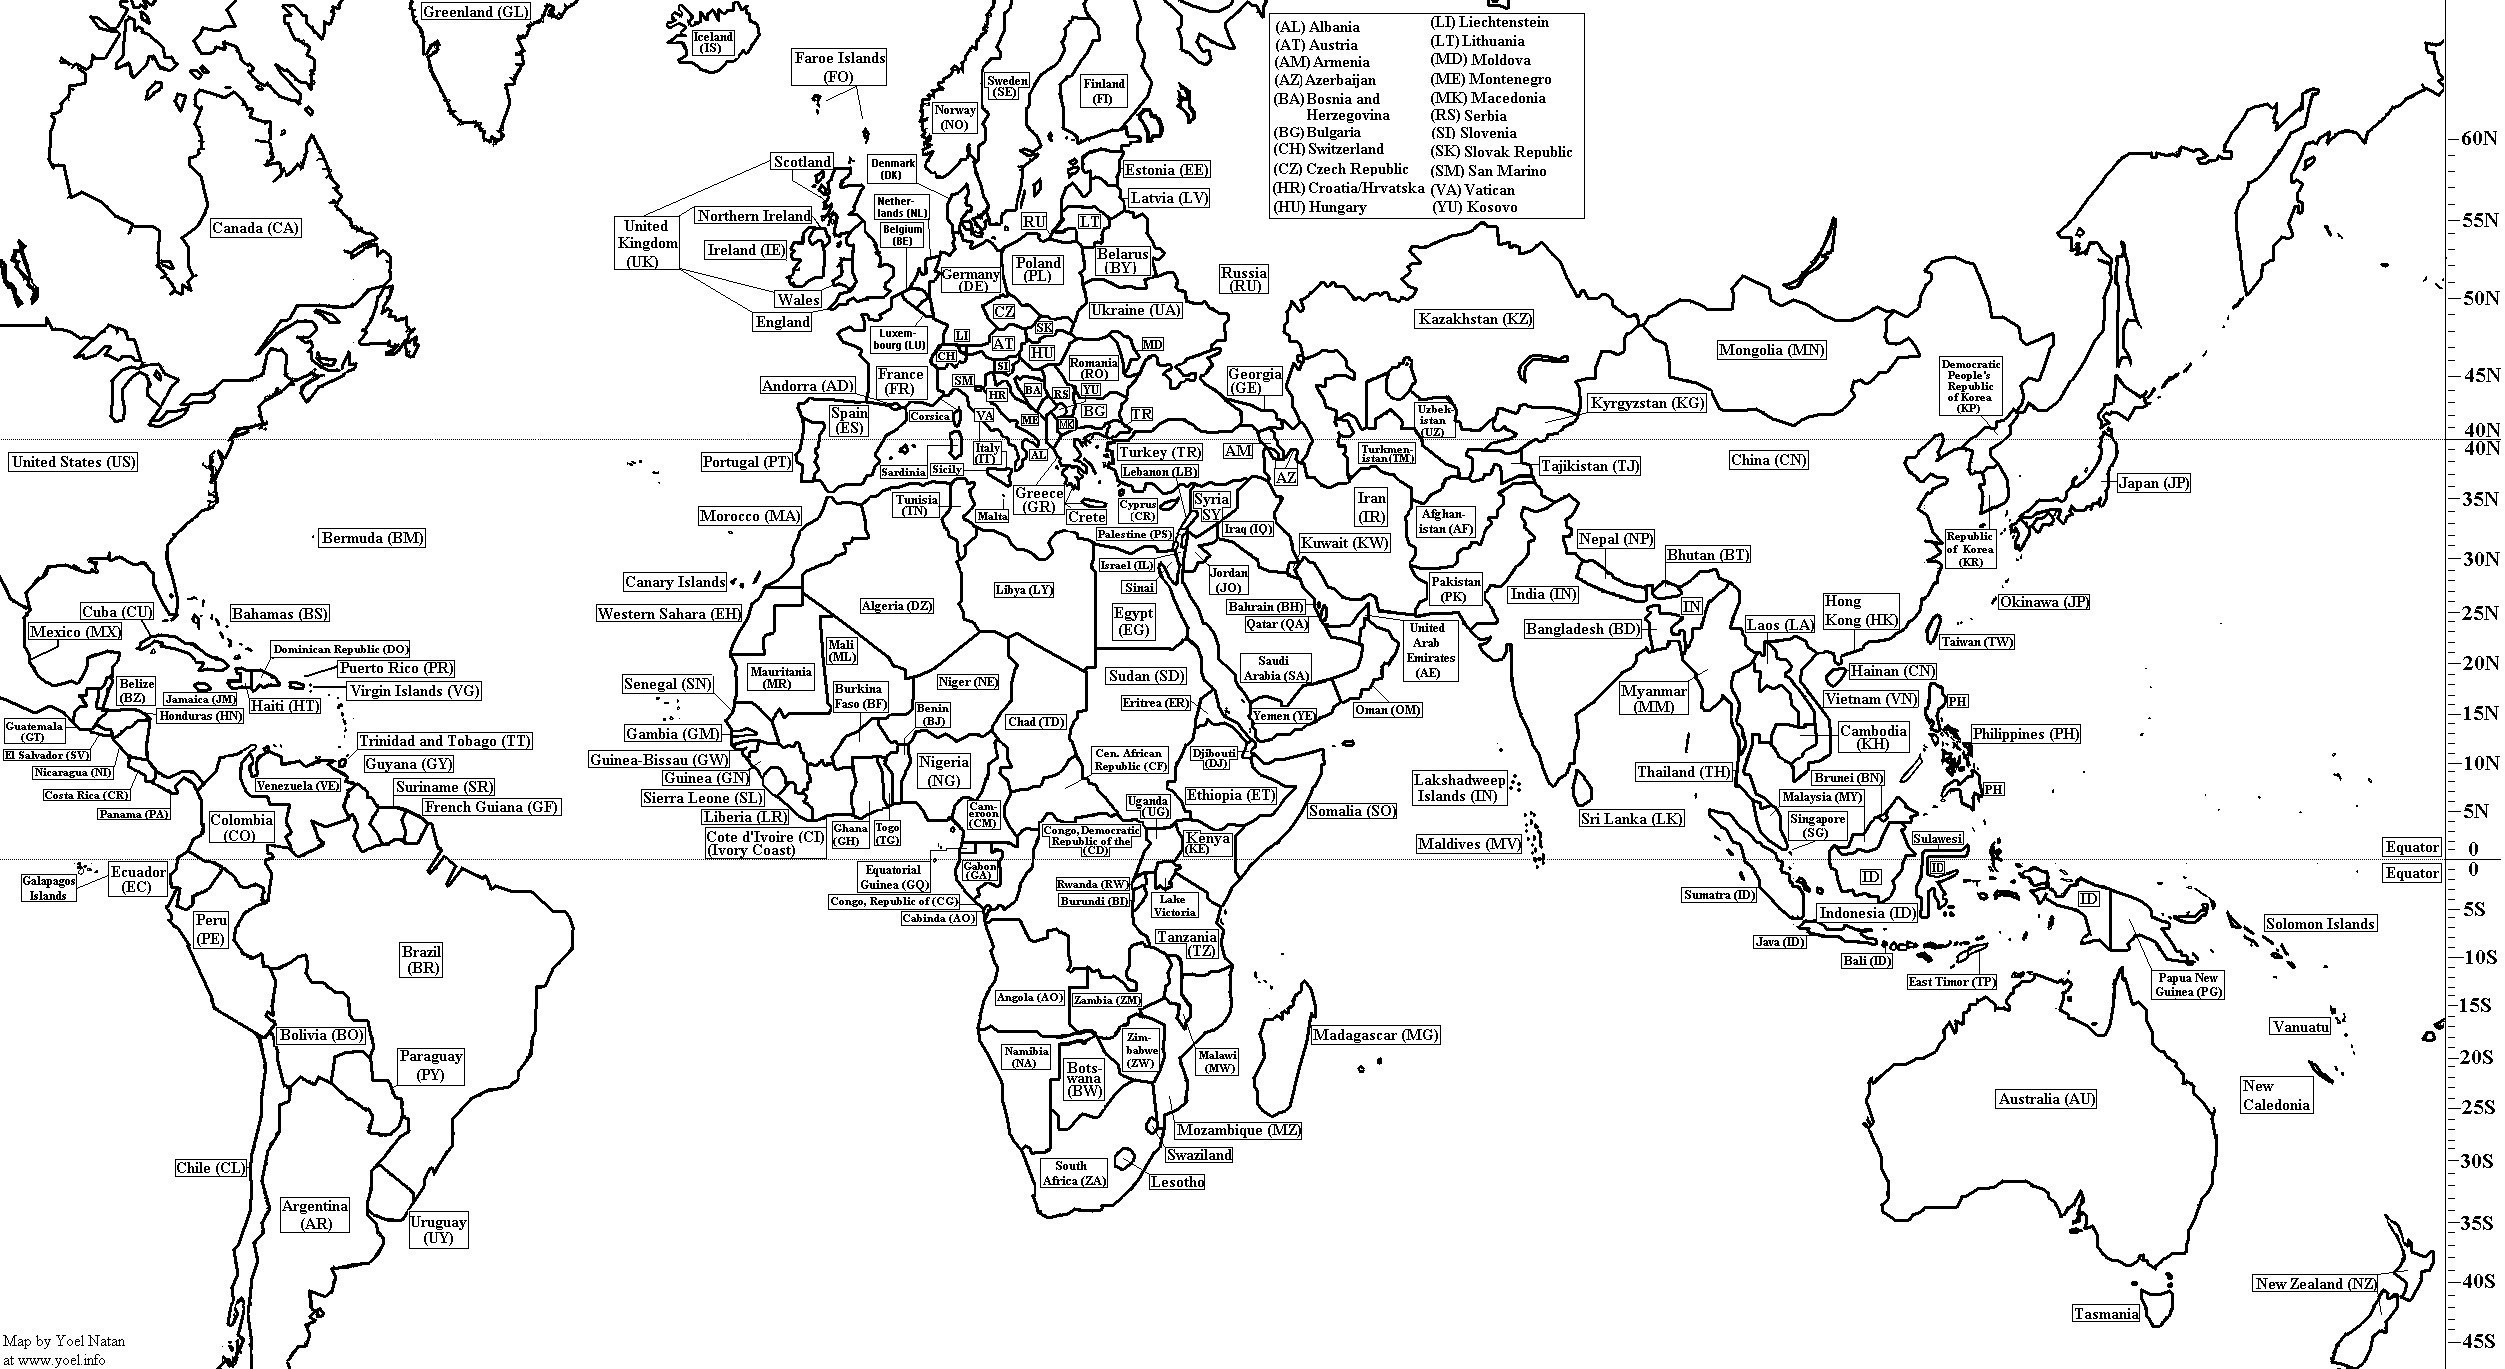 Printable Labeled World Maps - Lgq - Free Printable World Map With Countries Labeled